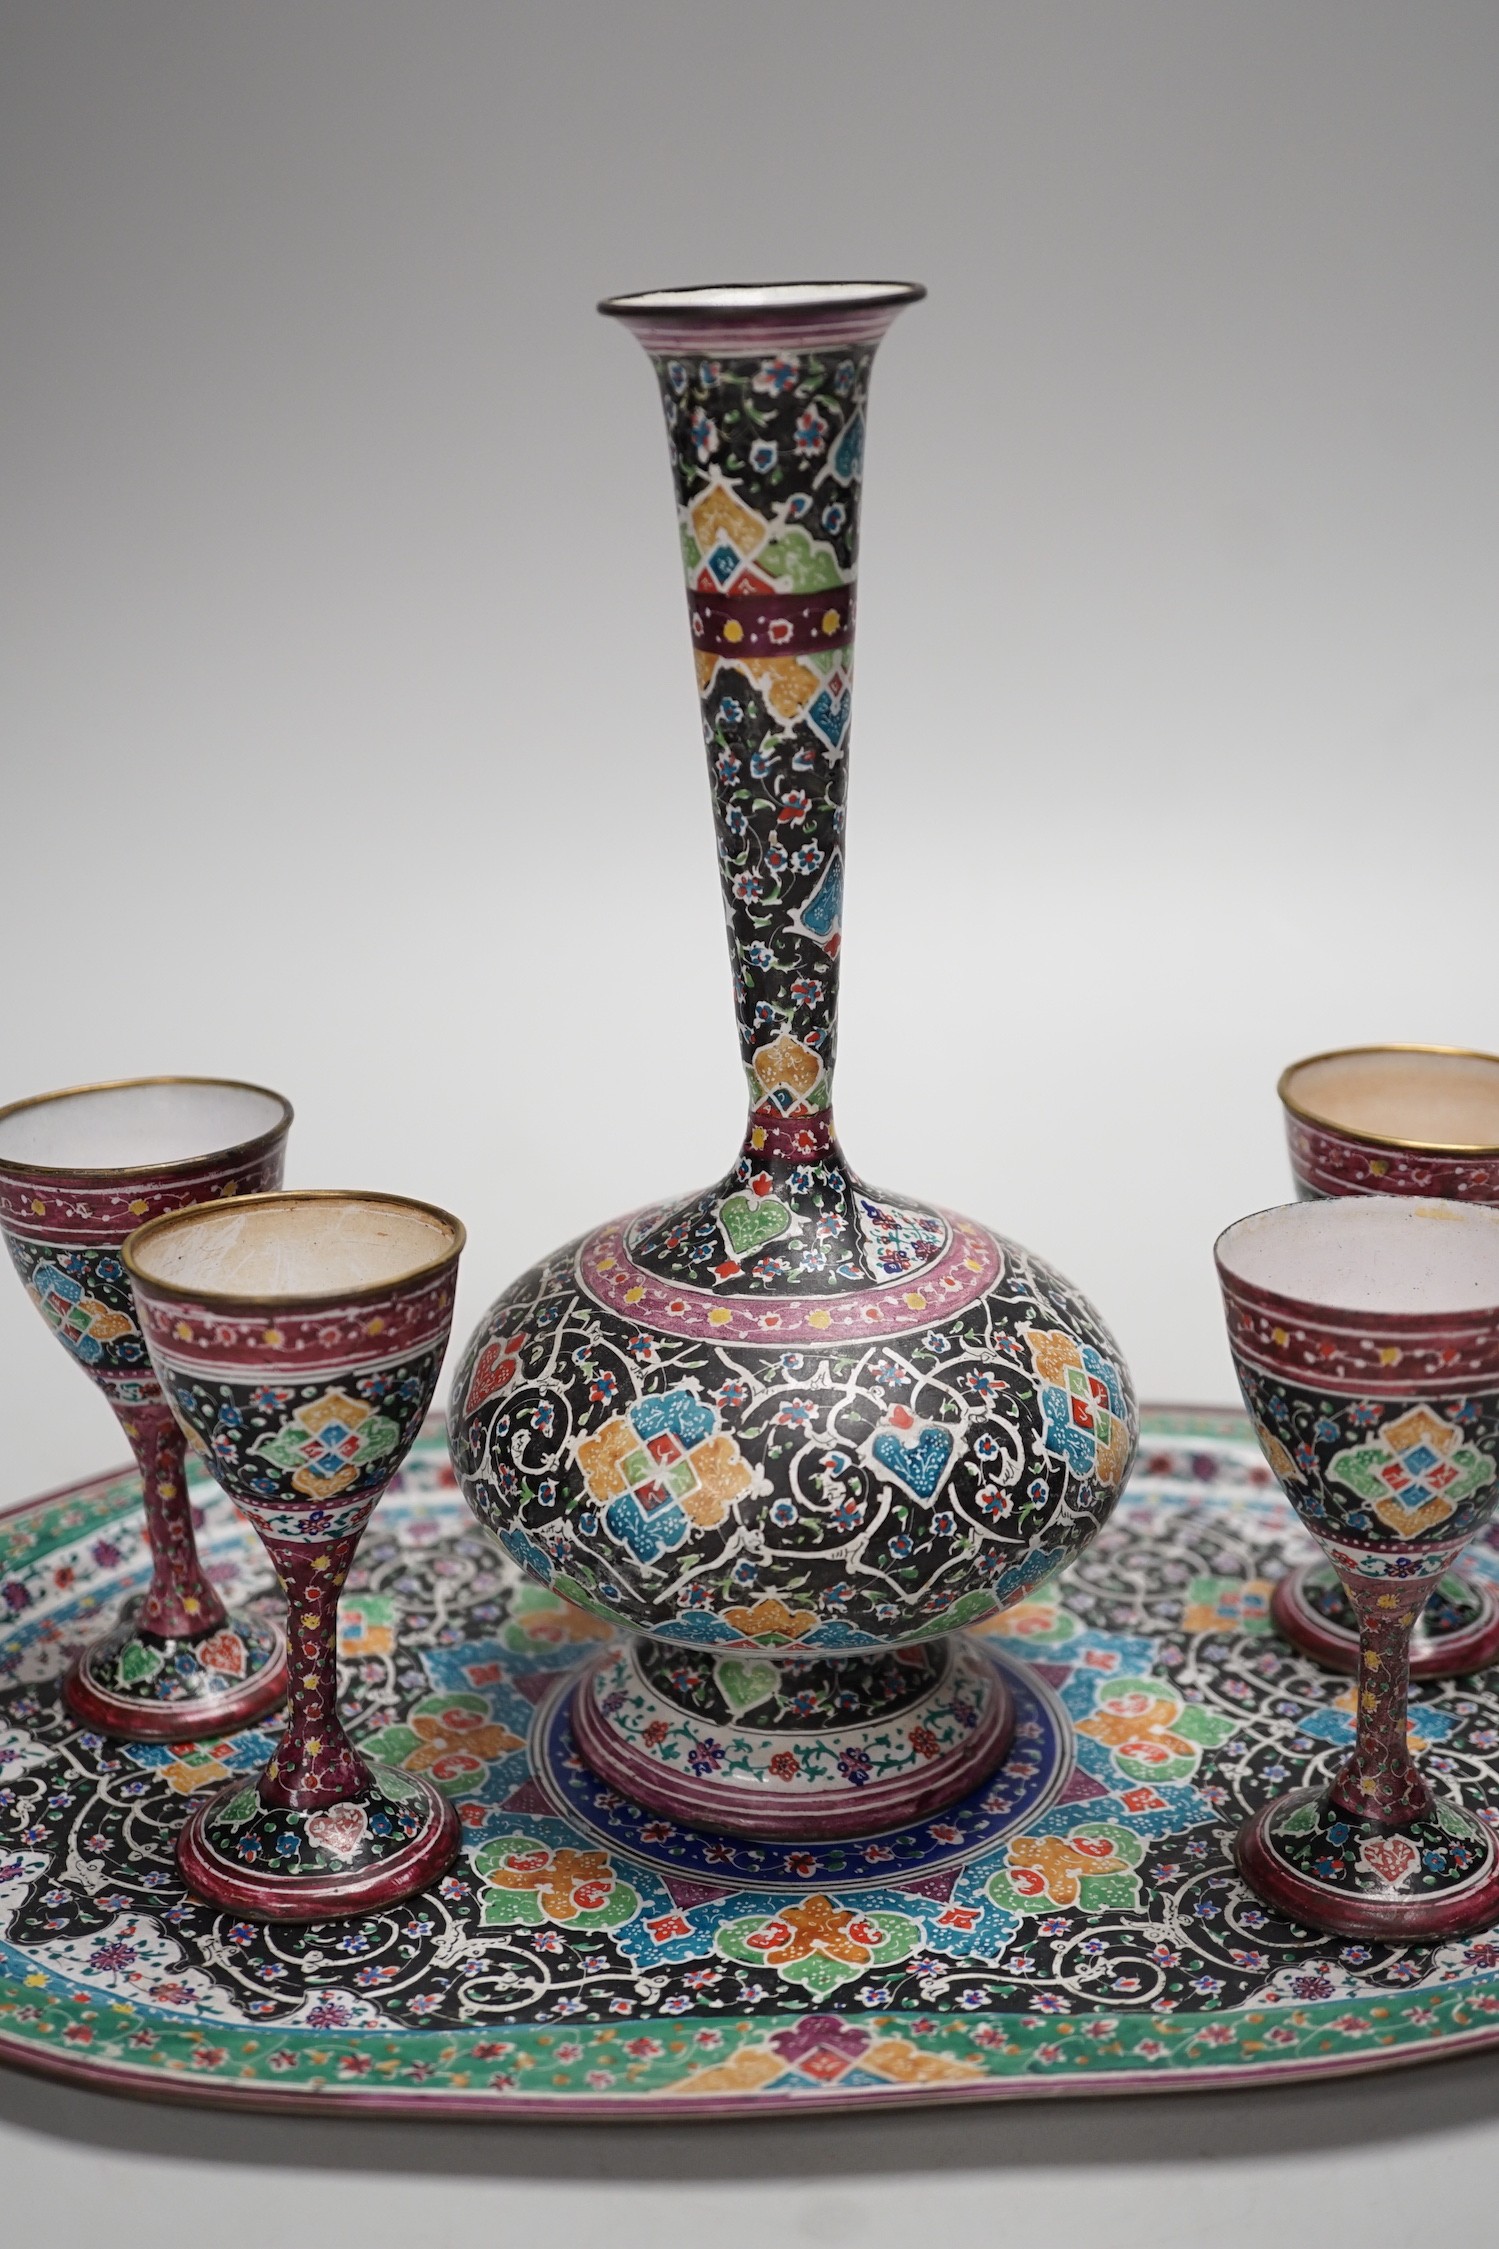 A decorative Persian enamel on copper set on stand. Tallest piece 20cm